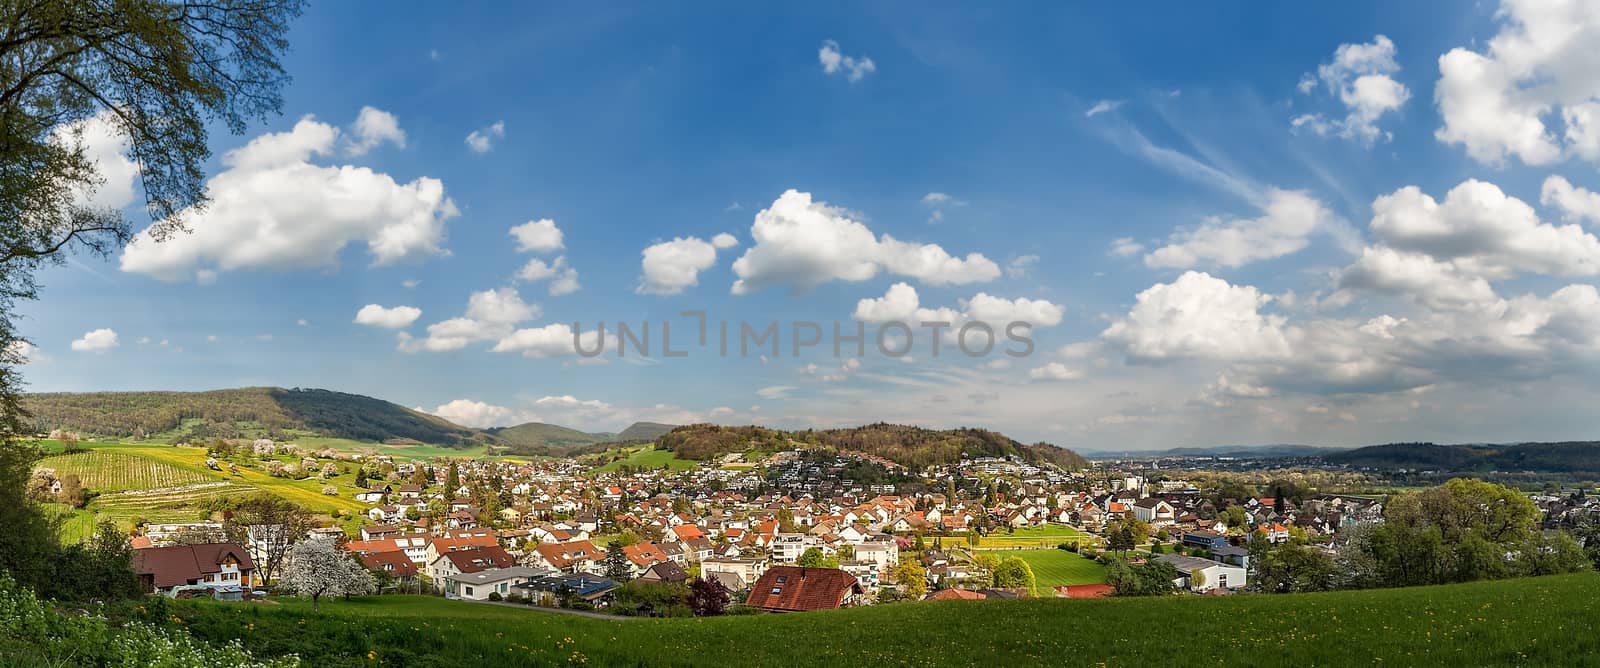 Erlinsbach is a municipality in the district of Aarau of the canton of Aargau in Switzerland.